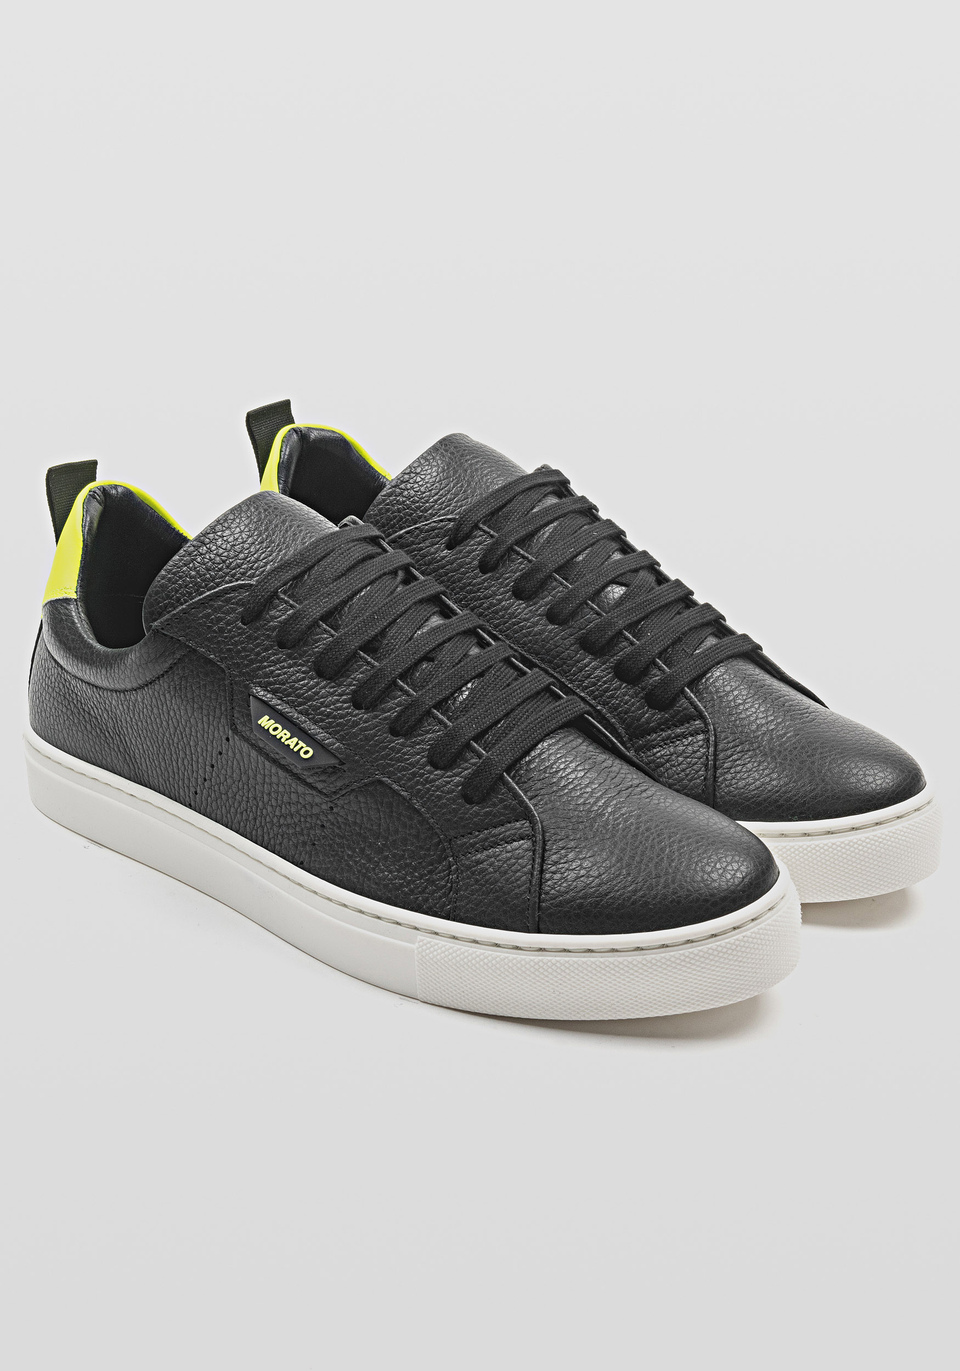 LOW-TOP SNEAKER IN SUPPLE TUMBLED LEATHER - Antony Morato Online Shop